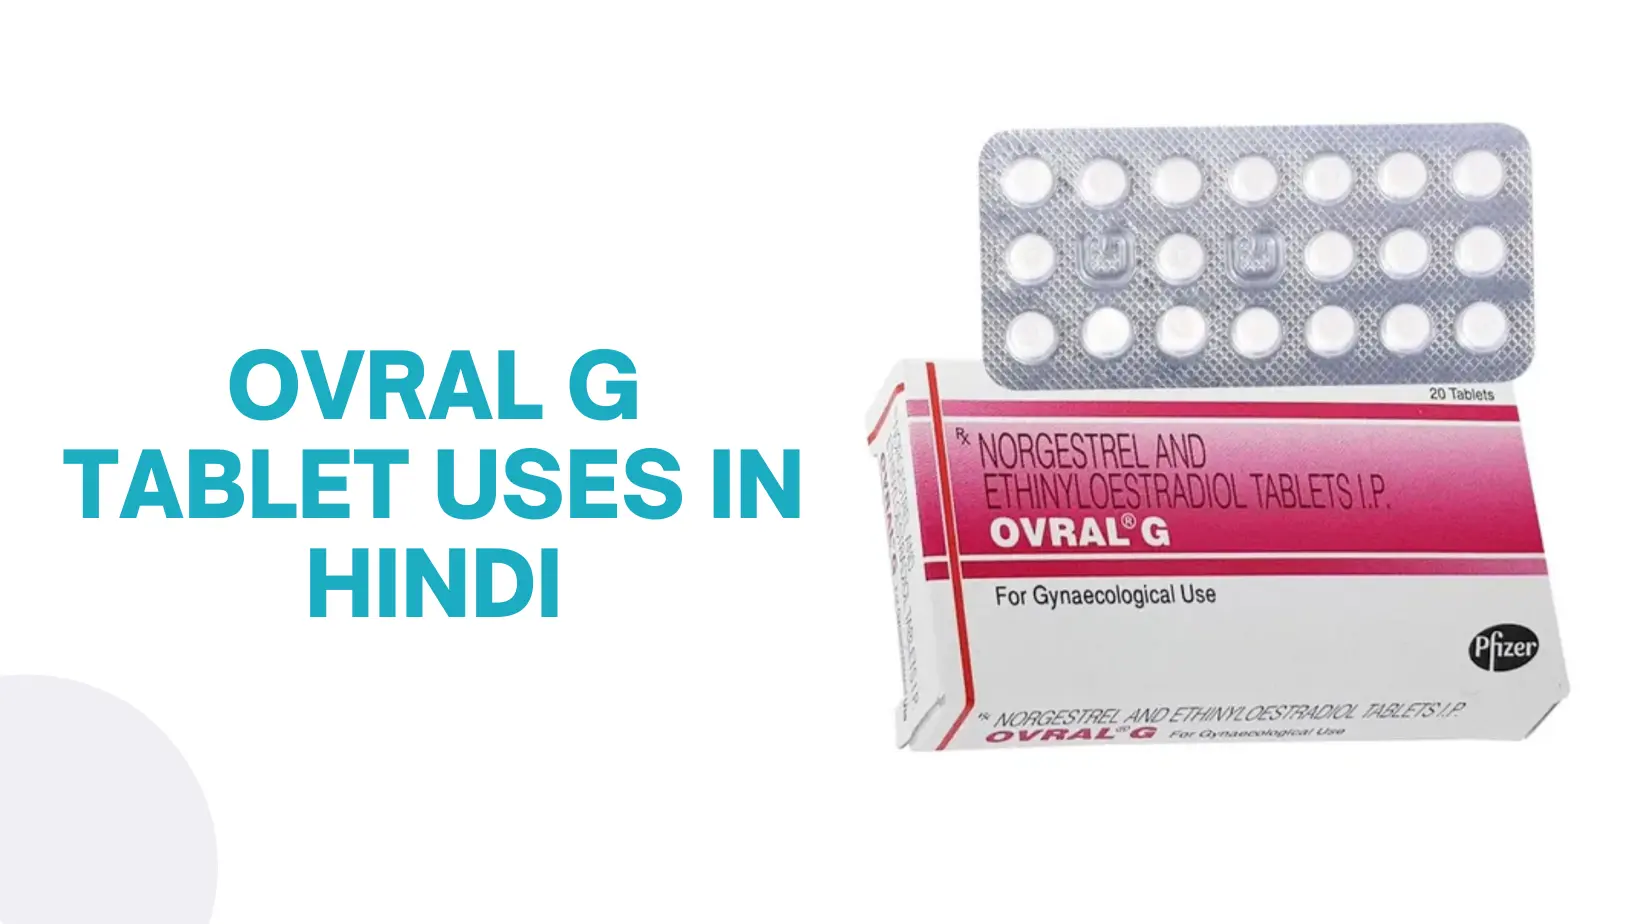 Ovral G Tablet Uses In Hindi